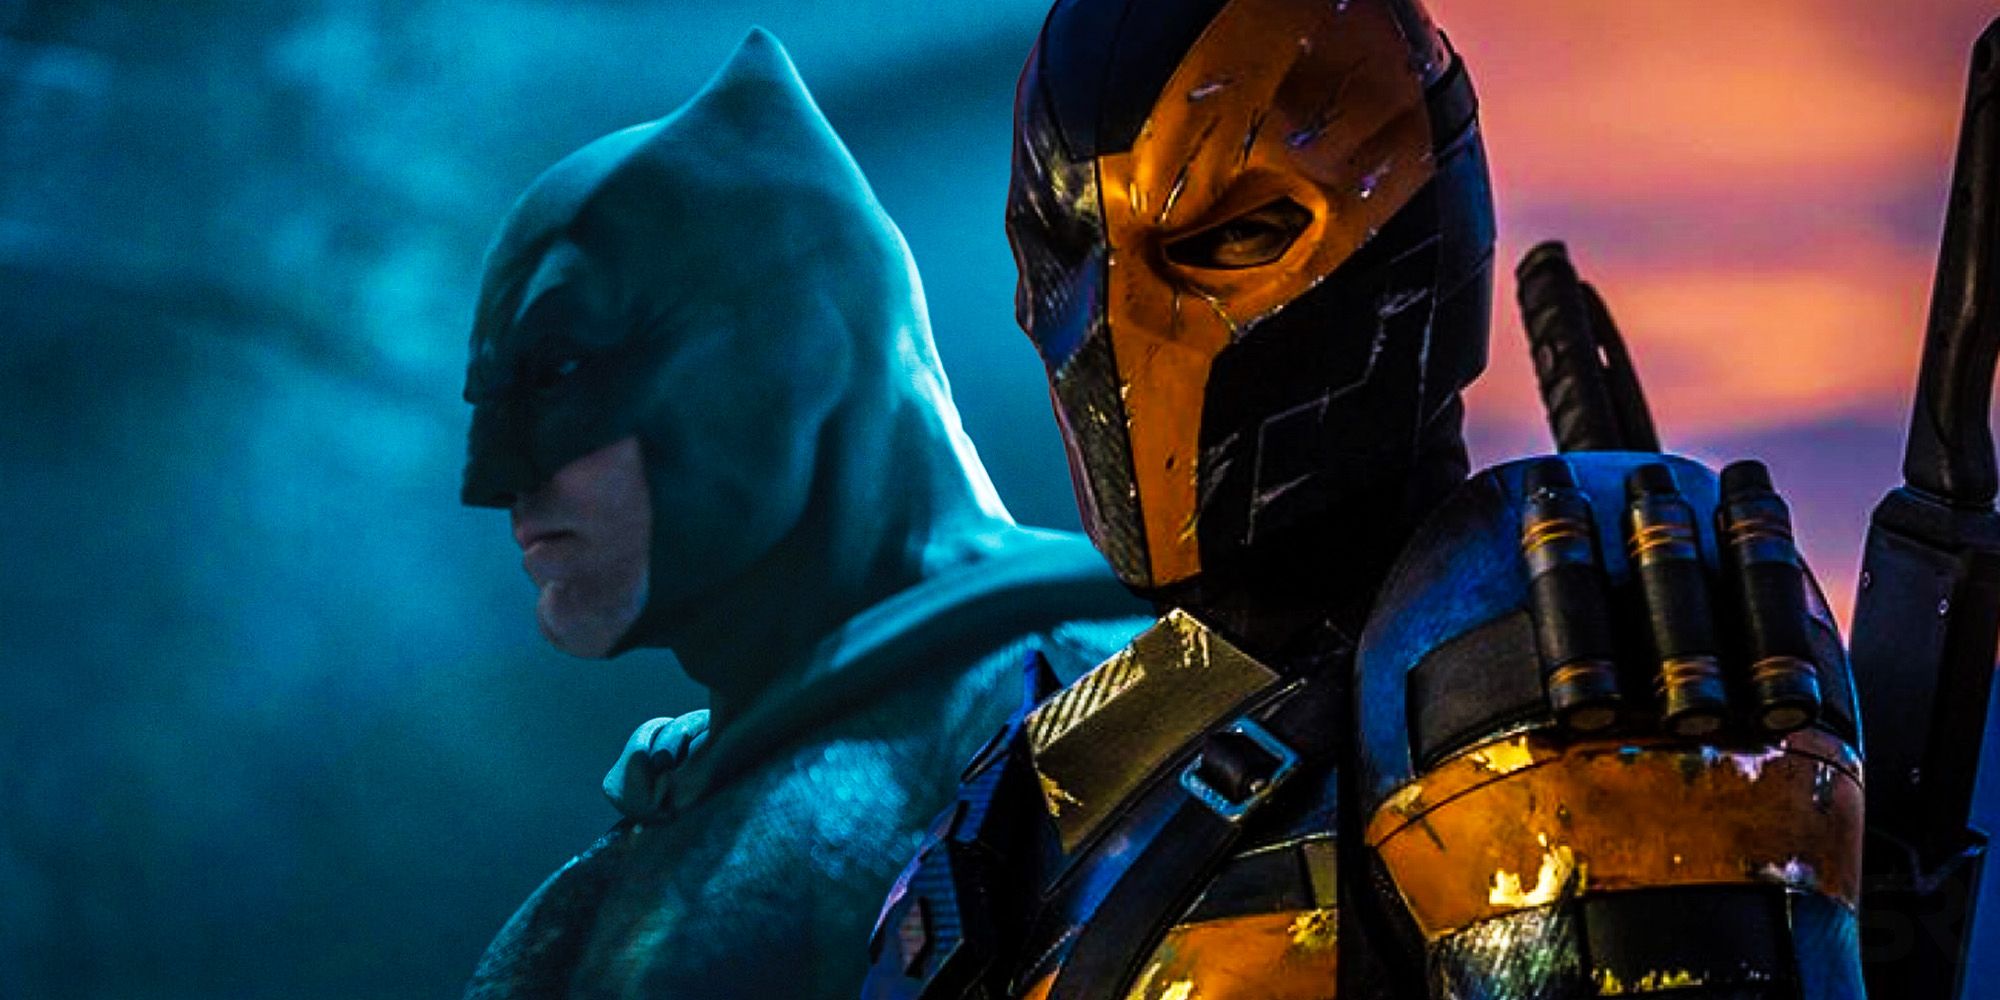 Ben Affleck Wanted Batman Solo Movie To Include Arkham Games Style Deathstroke Fight